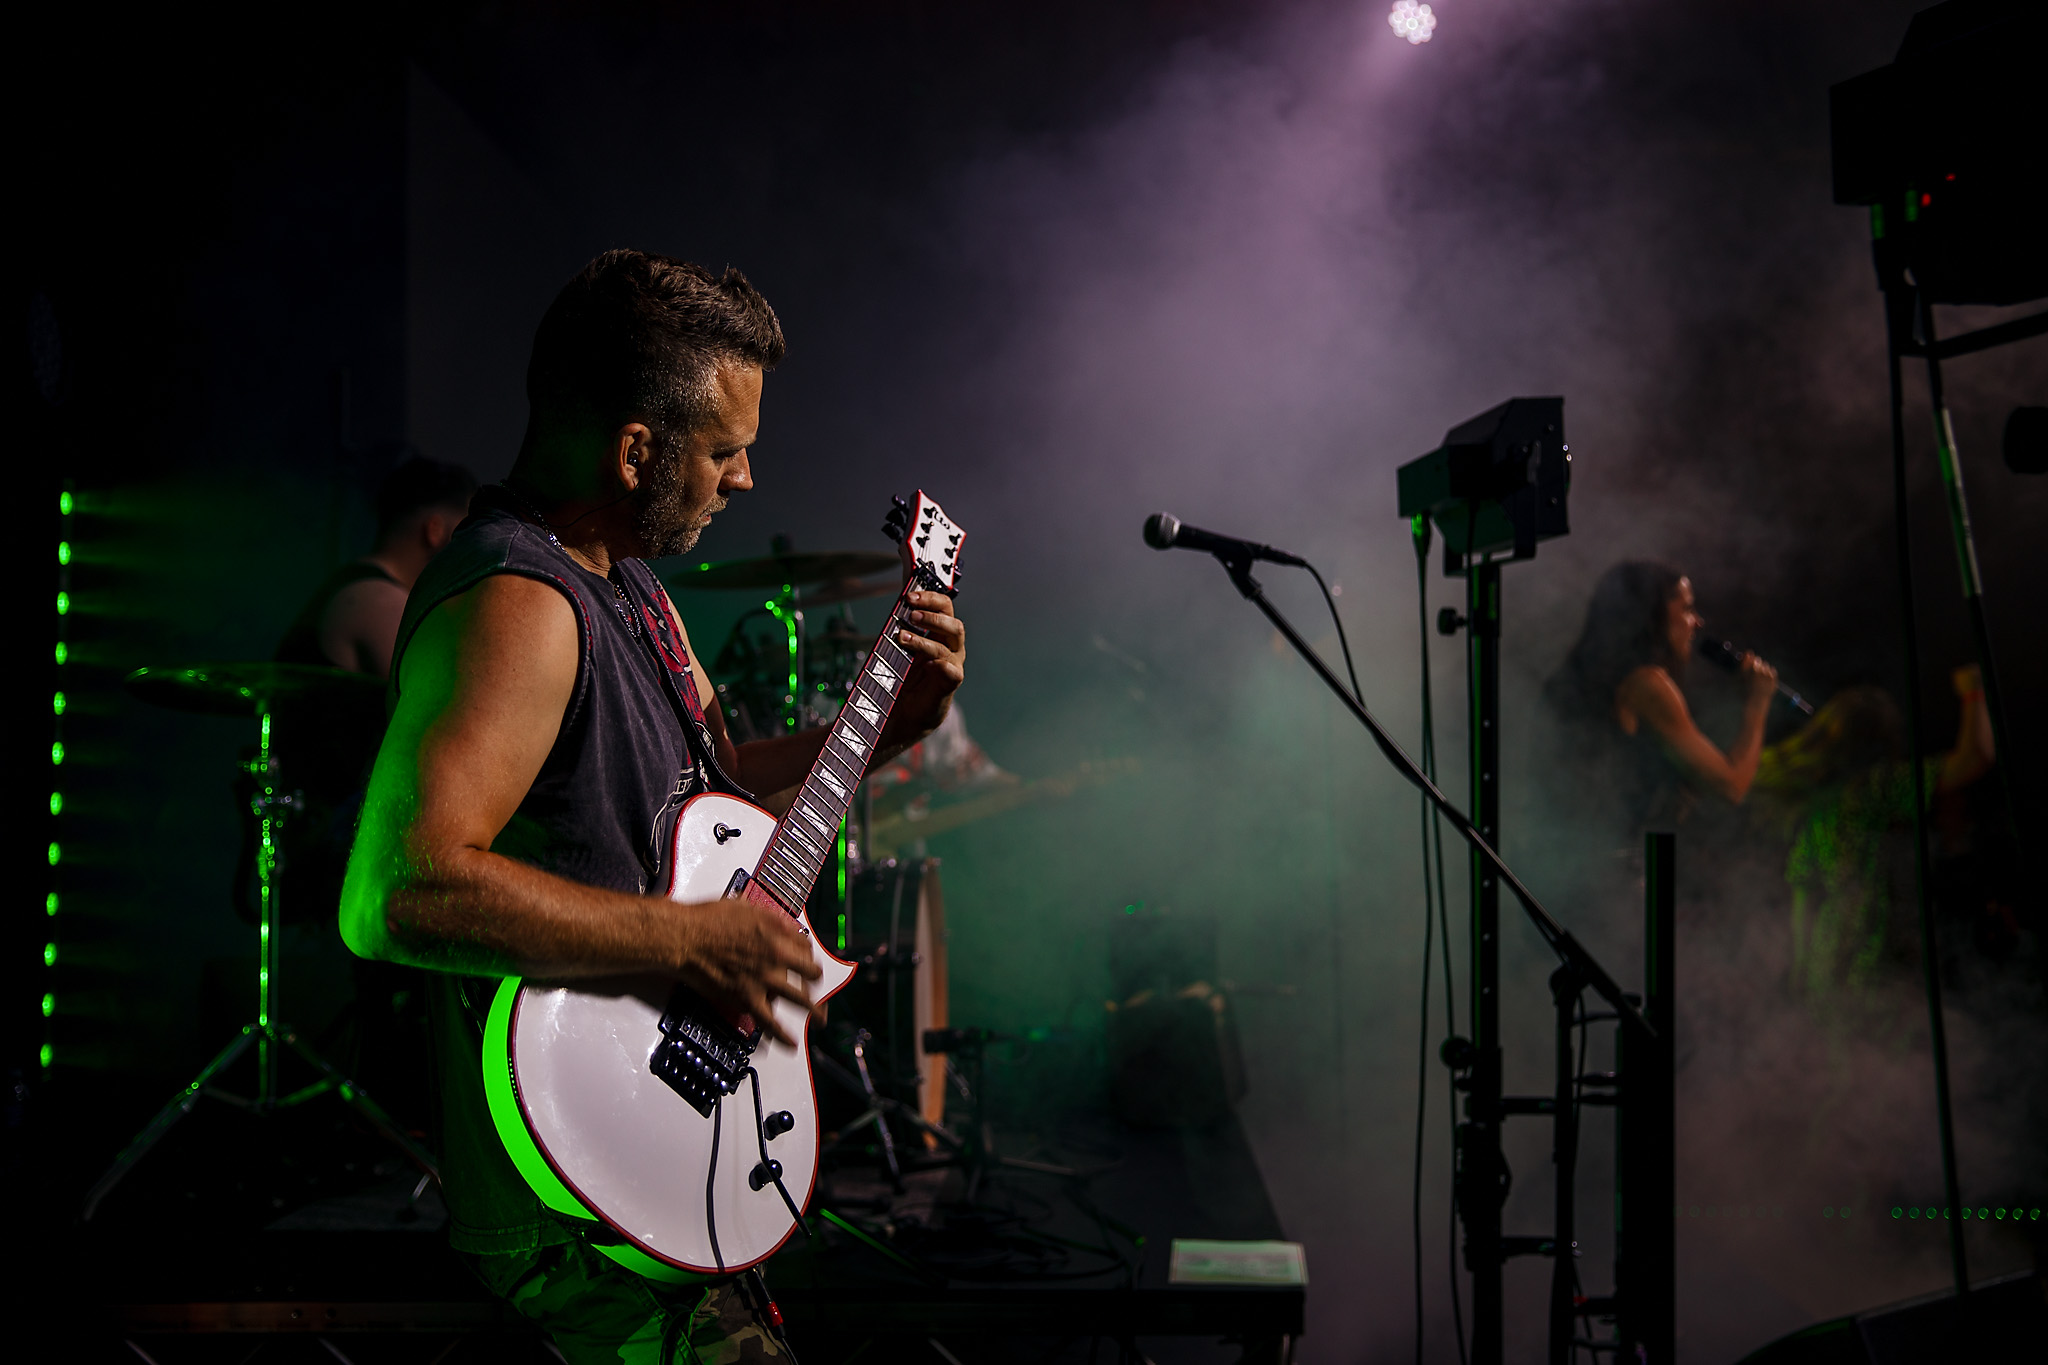 Take a look at some of our favourite moments from our Eastbourne Rock Fest 2022 night. Five hours of live Rock Covers from two amazing bands.